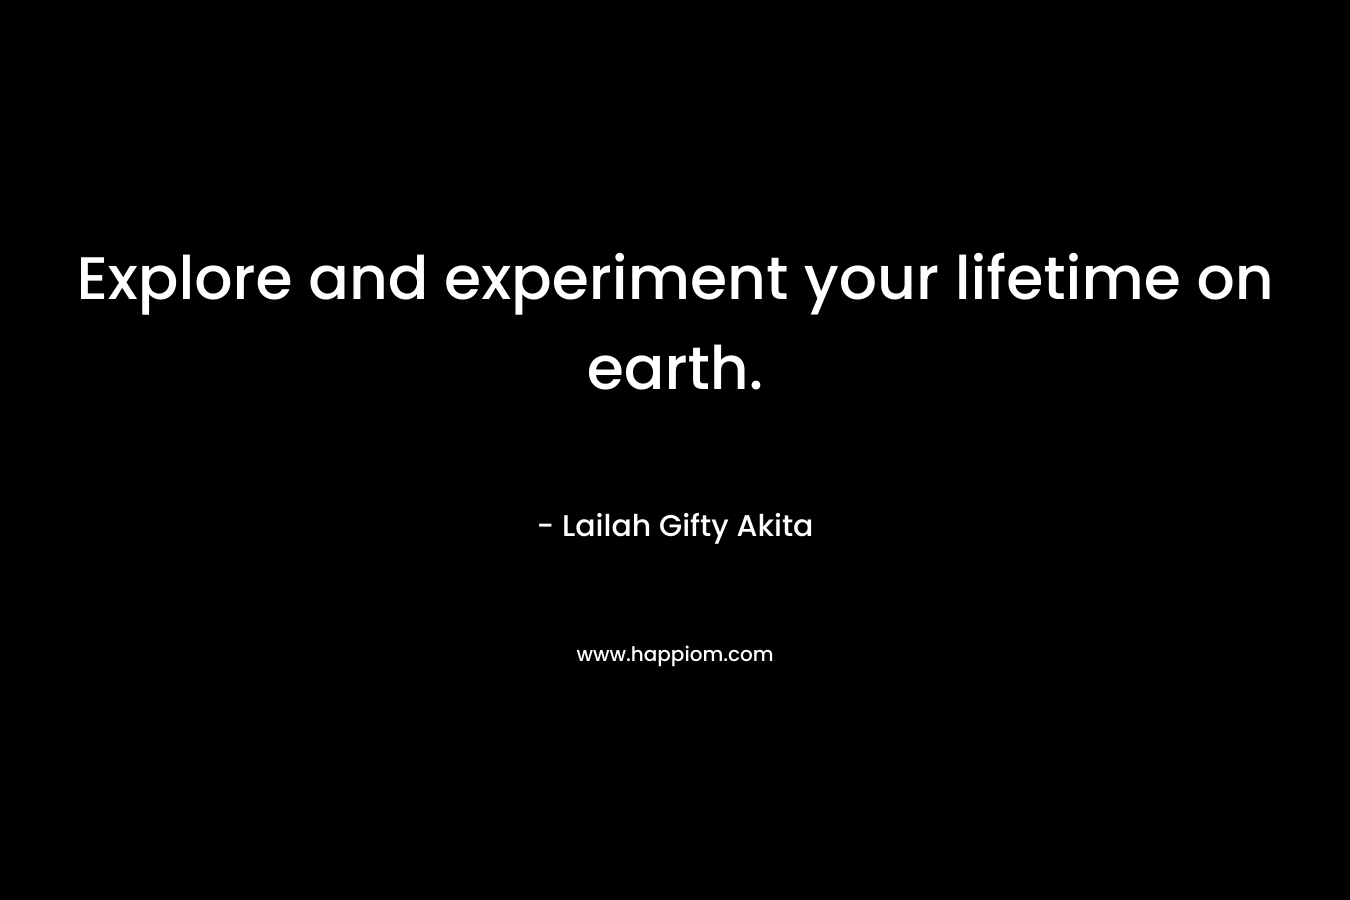 Explore and experiment your lifetime on earth. – Lailah Gifty Akita